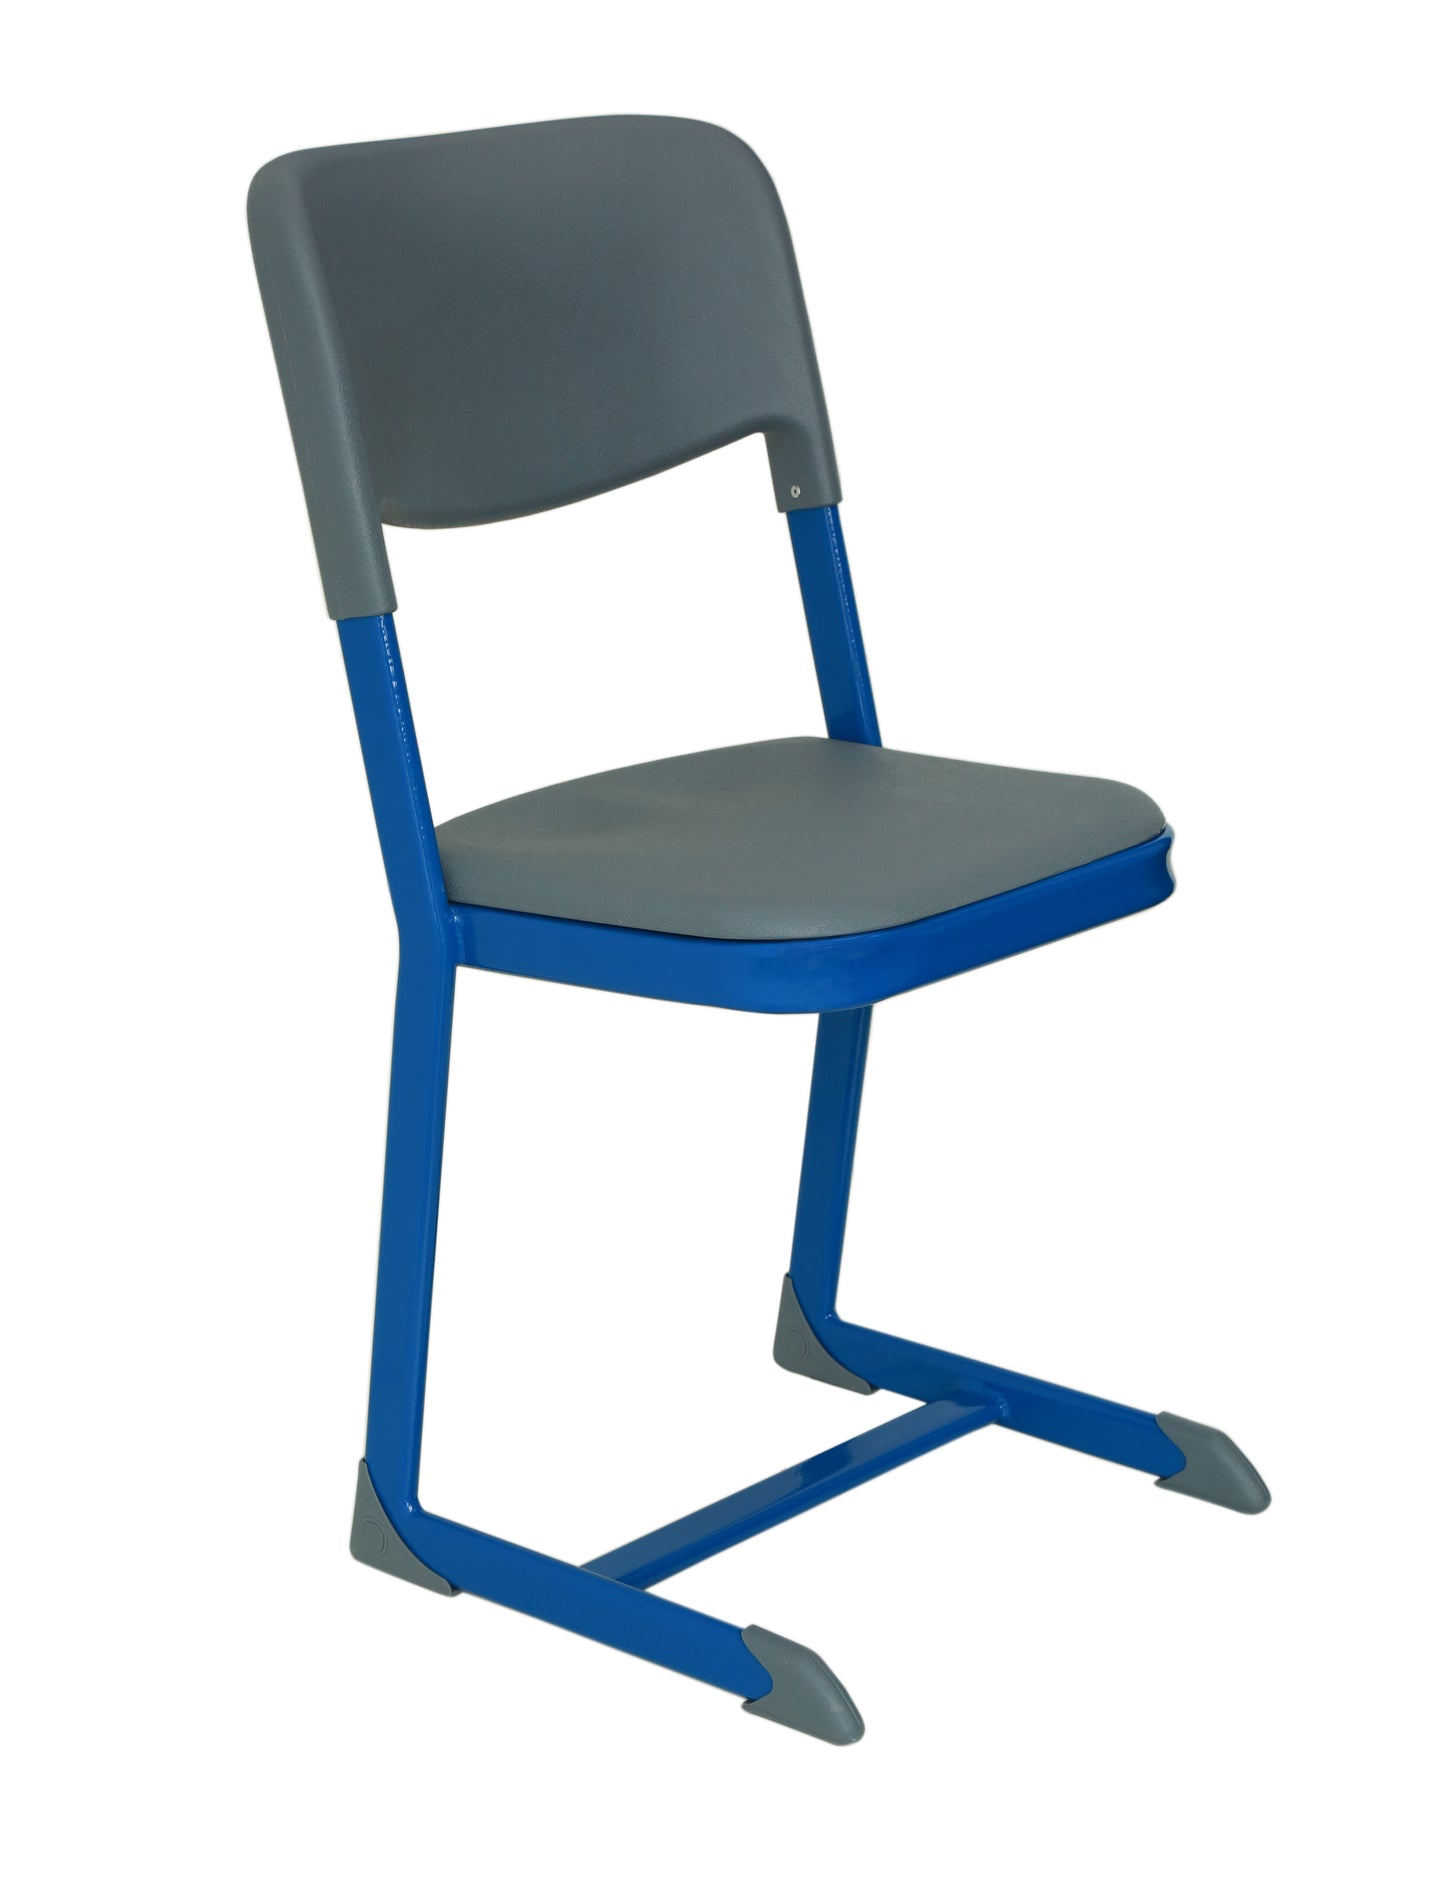 MODEL MT-1005 Plastic Blow moulded shell Back and Seat